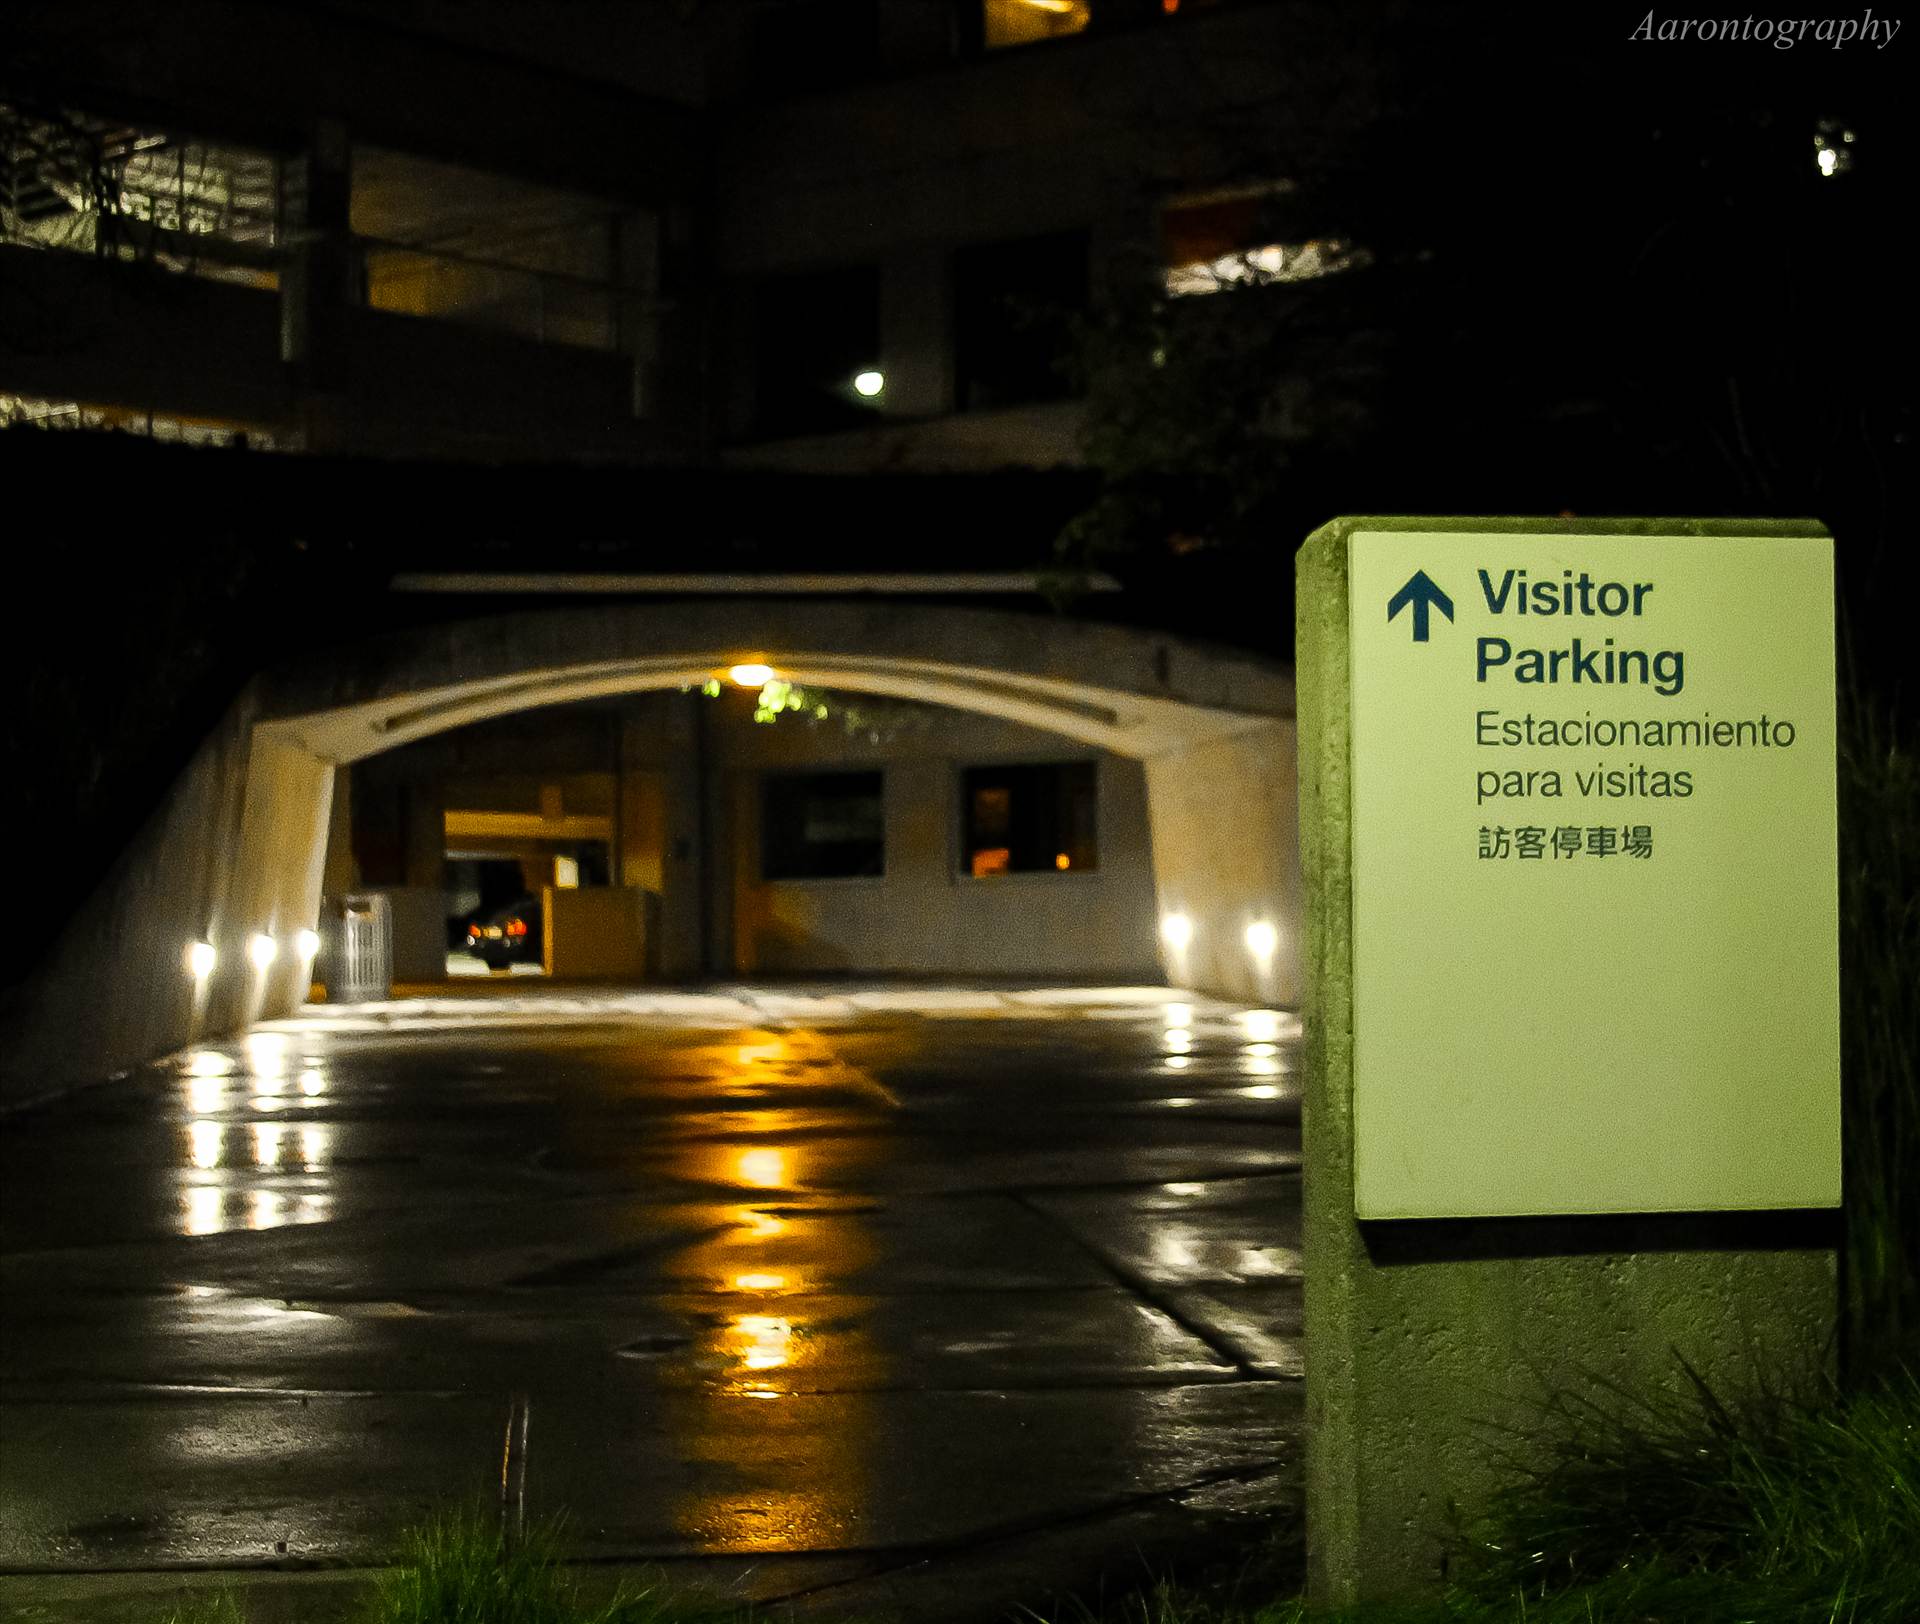 Visitor Parking (1 of 1).jpg - undefined by Aaron